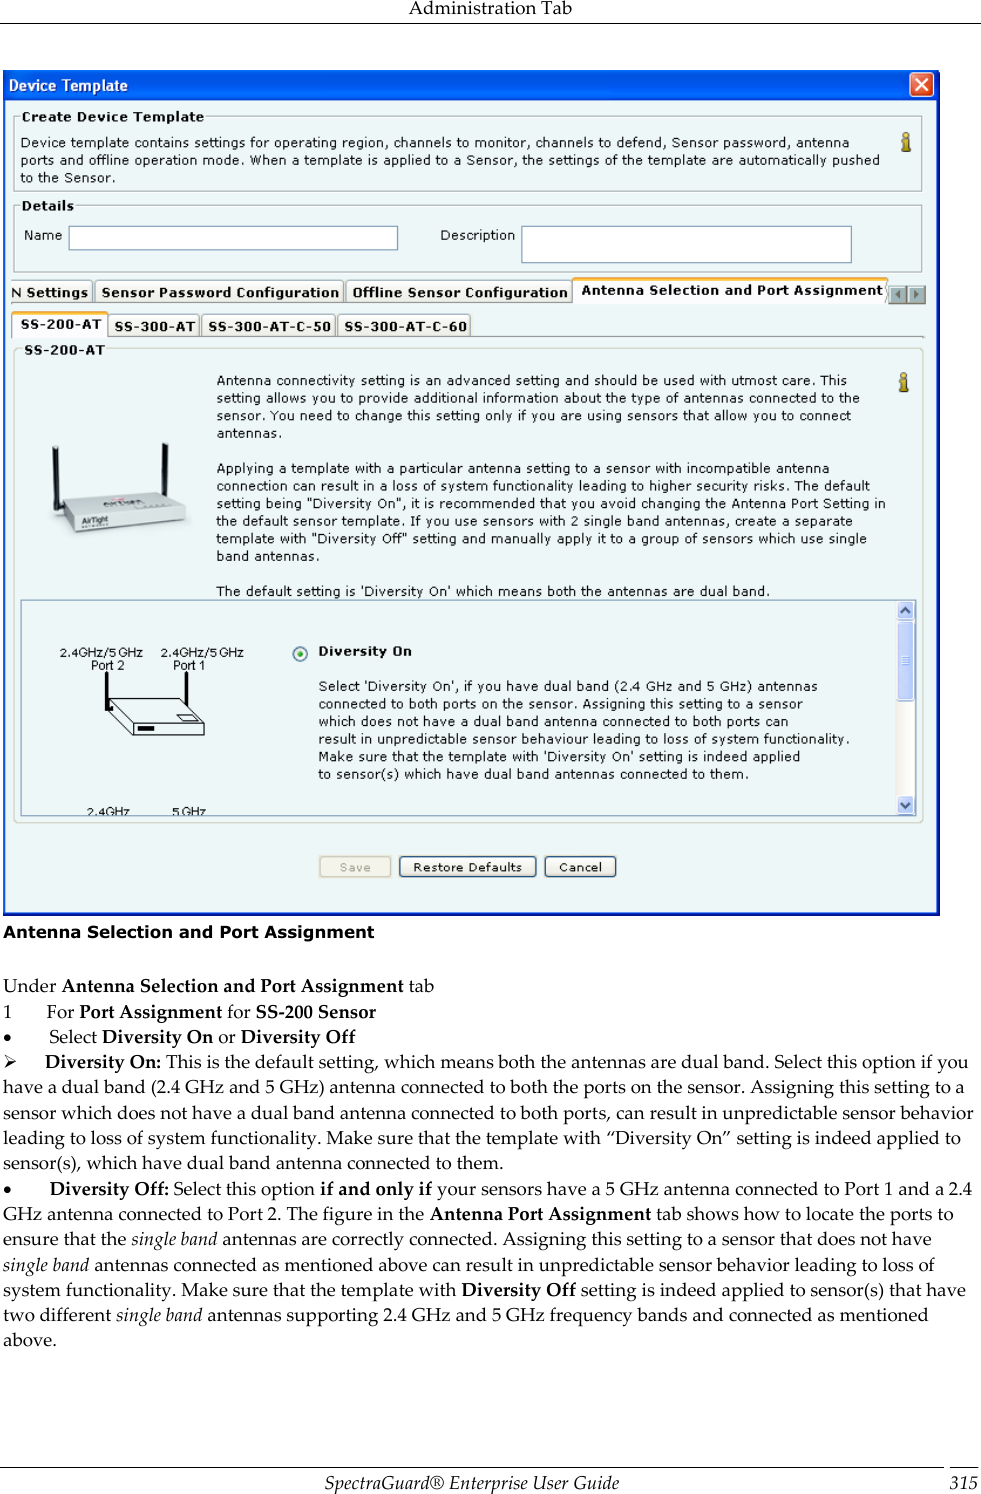 Administration Tab SpectraGuard®  Enterprise User Guide 315  Antenna Selection and Port Assignment   Under Antenna Selection and Port Assignment tab 1         For Port Assignment for SS-200 Sensor           Select Diversity On or Diversity Off        Diversity On: This is the default setting, which means both the antennas are dual band. Select this option if you have a dual band (2.4 GHz and 5 GHz) antenna connected to both the ports on the sensor. Assigning this setting to a sensor which does not have a dual band antenna connected to both ports, can result in unpredictable sensor behavior leading to loss of system functionality. Make sure that the template with “Diversity On” setting is indeed applied to sensor(s), which have dual band antenna connected to them.           Diversity Off: Select this option if and only if your sensors have a 5 GHz antenna connected to Port 1 and a 2.4 GHz antenna connected to Port 2. The figure in the Antenna Port Assignment tab shows how to locate the ports to ensure that the single band antennas are correctly connected. Assigning this setting to a sensor that does not have single band antennas connected as mentioned above can result in unpredictable sensor behavior leading to loss of system functionality. Make sure that the template with Diversity Off setting is indeed applied to sensor(s) that have two different single band antennas supporting 2.4 GHz and 5 GHz frequency bands and connected as mentioned above. 